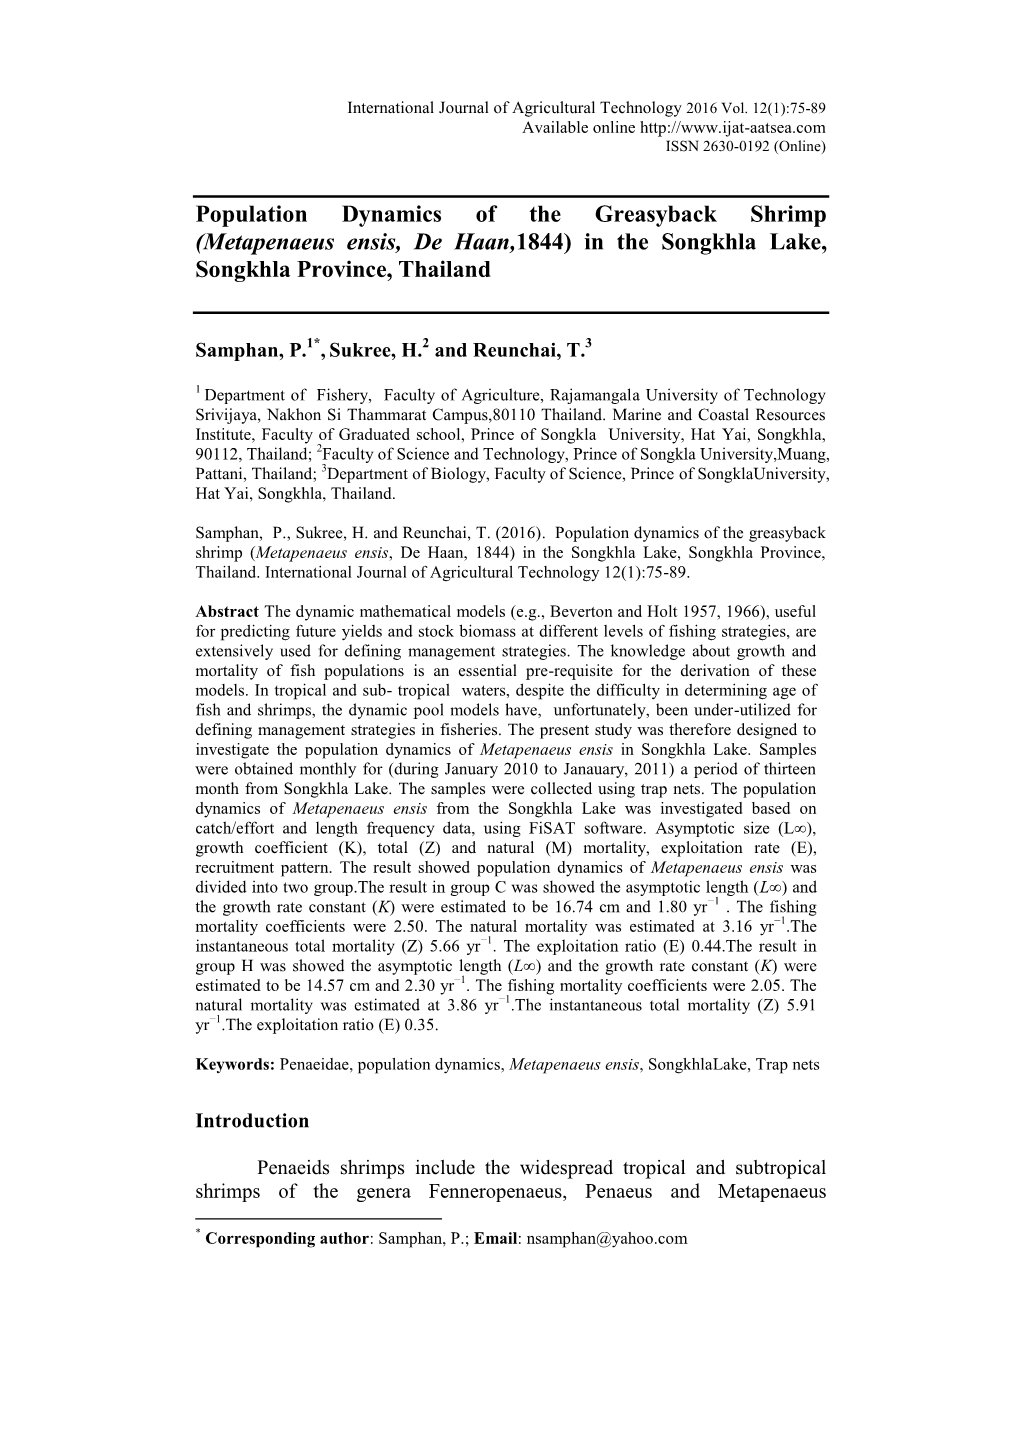 Population Dynamics of the Greasyback Shrimp (Metapenaeus Ensis, De Haan,1844) in the Songkhla Lake, Songkhla Province, Thailand